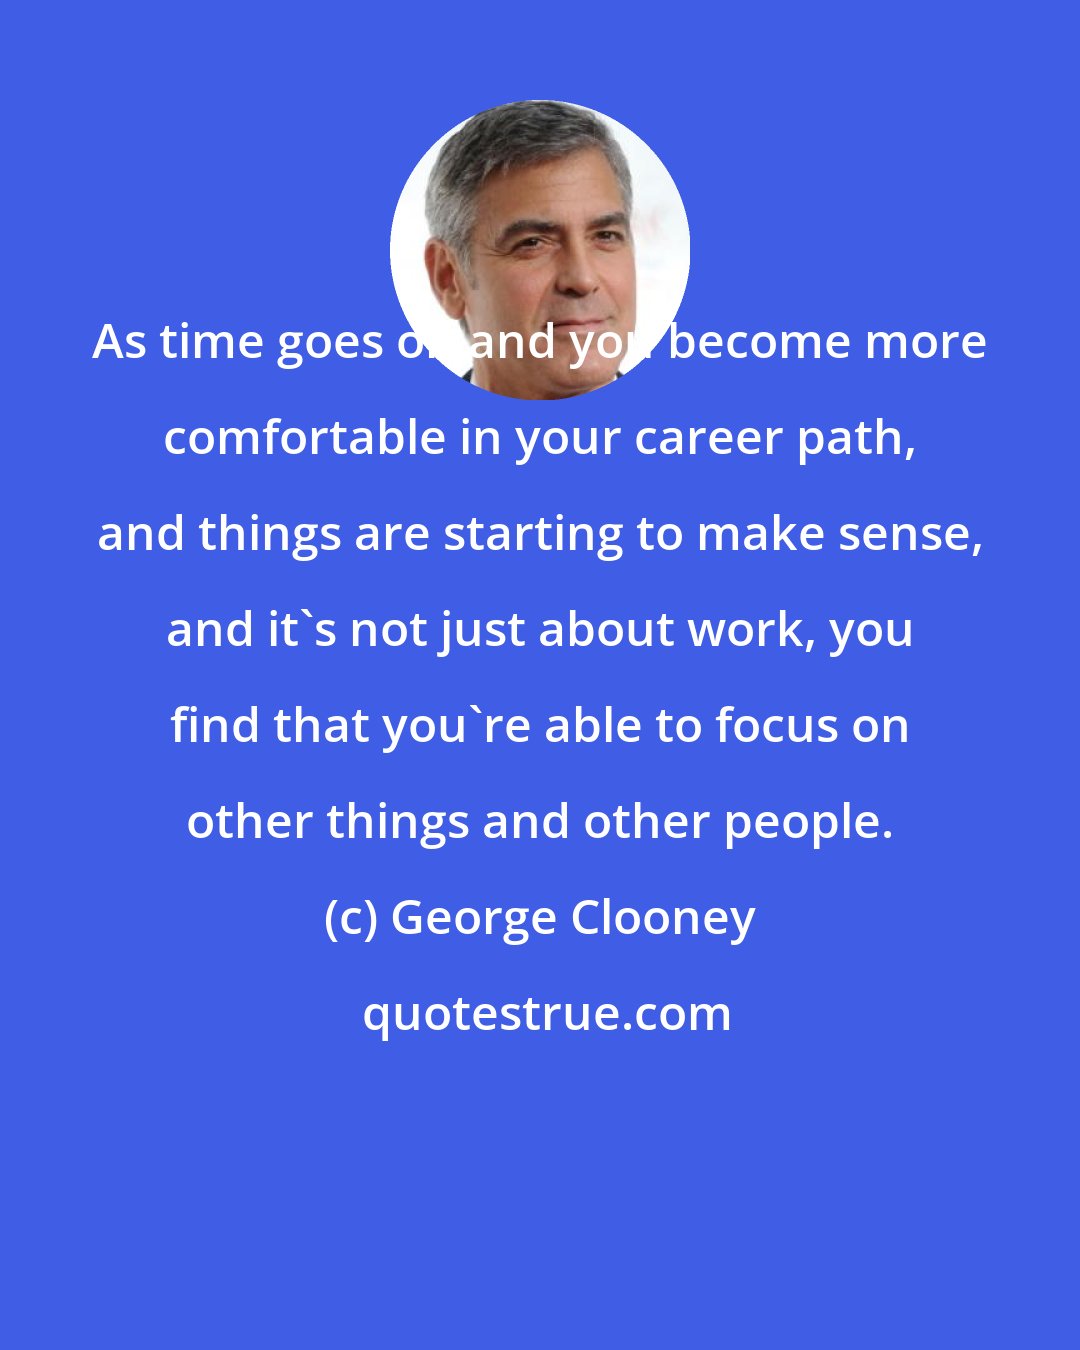 George Clooney: As time goes on and you become more comfortable in your career path, and things are starting to make sense, and it's not just about work, you find that you're able to focus on other things and other people.